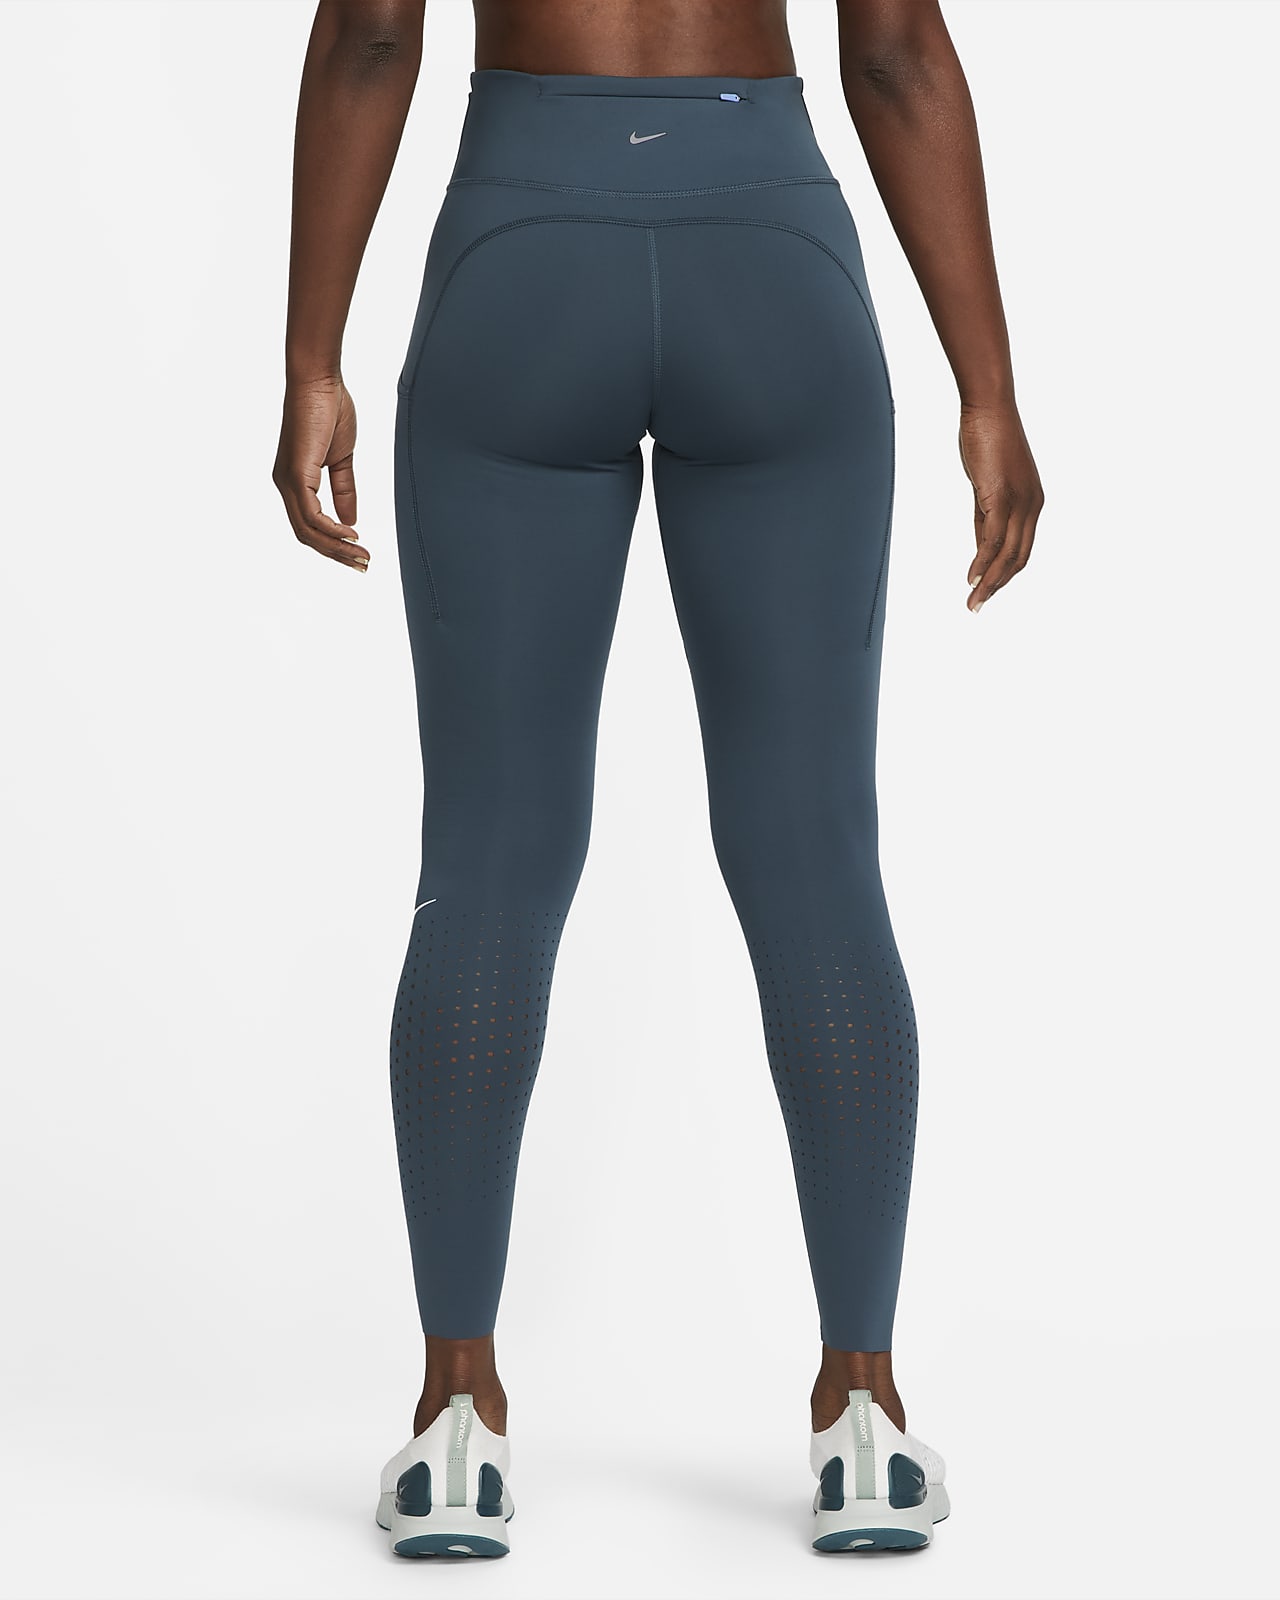 the perfect leggings do exist―the new @nike Go Leggings. suctions